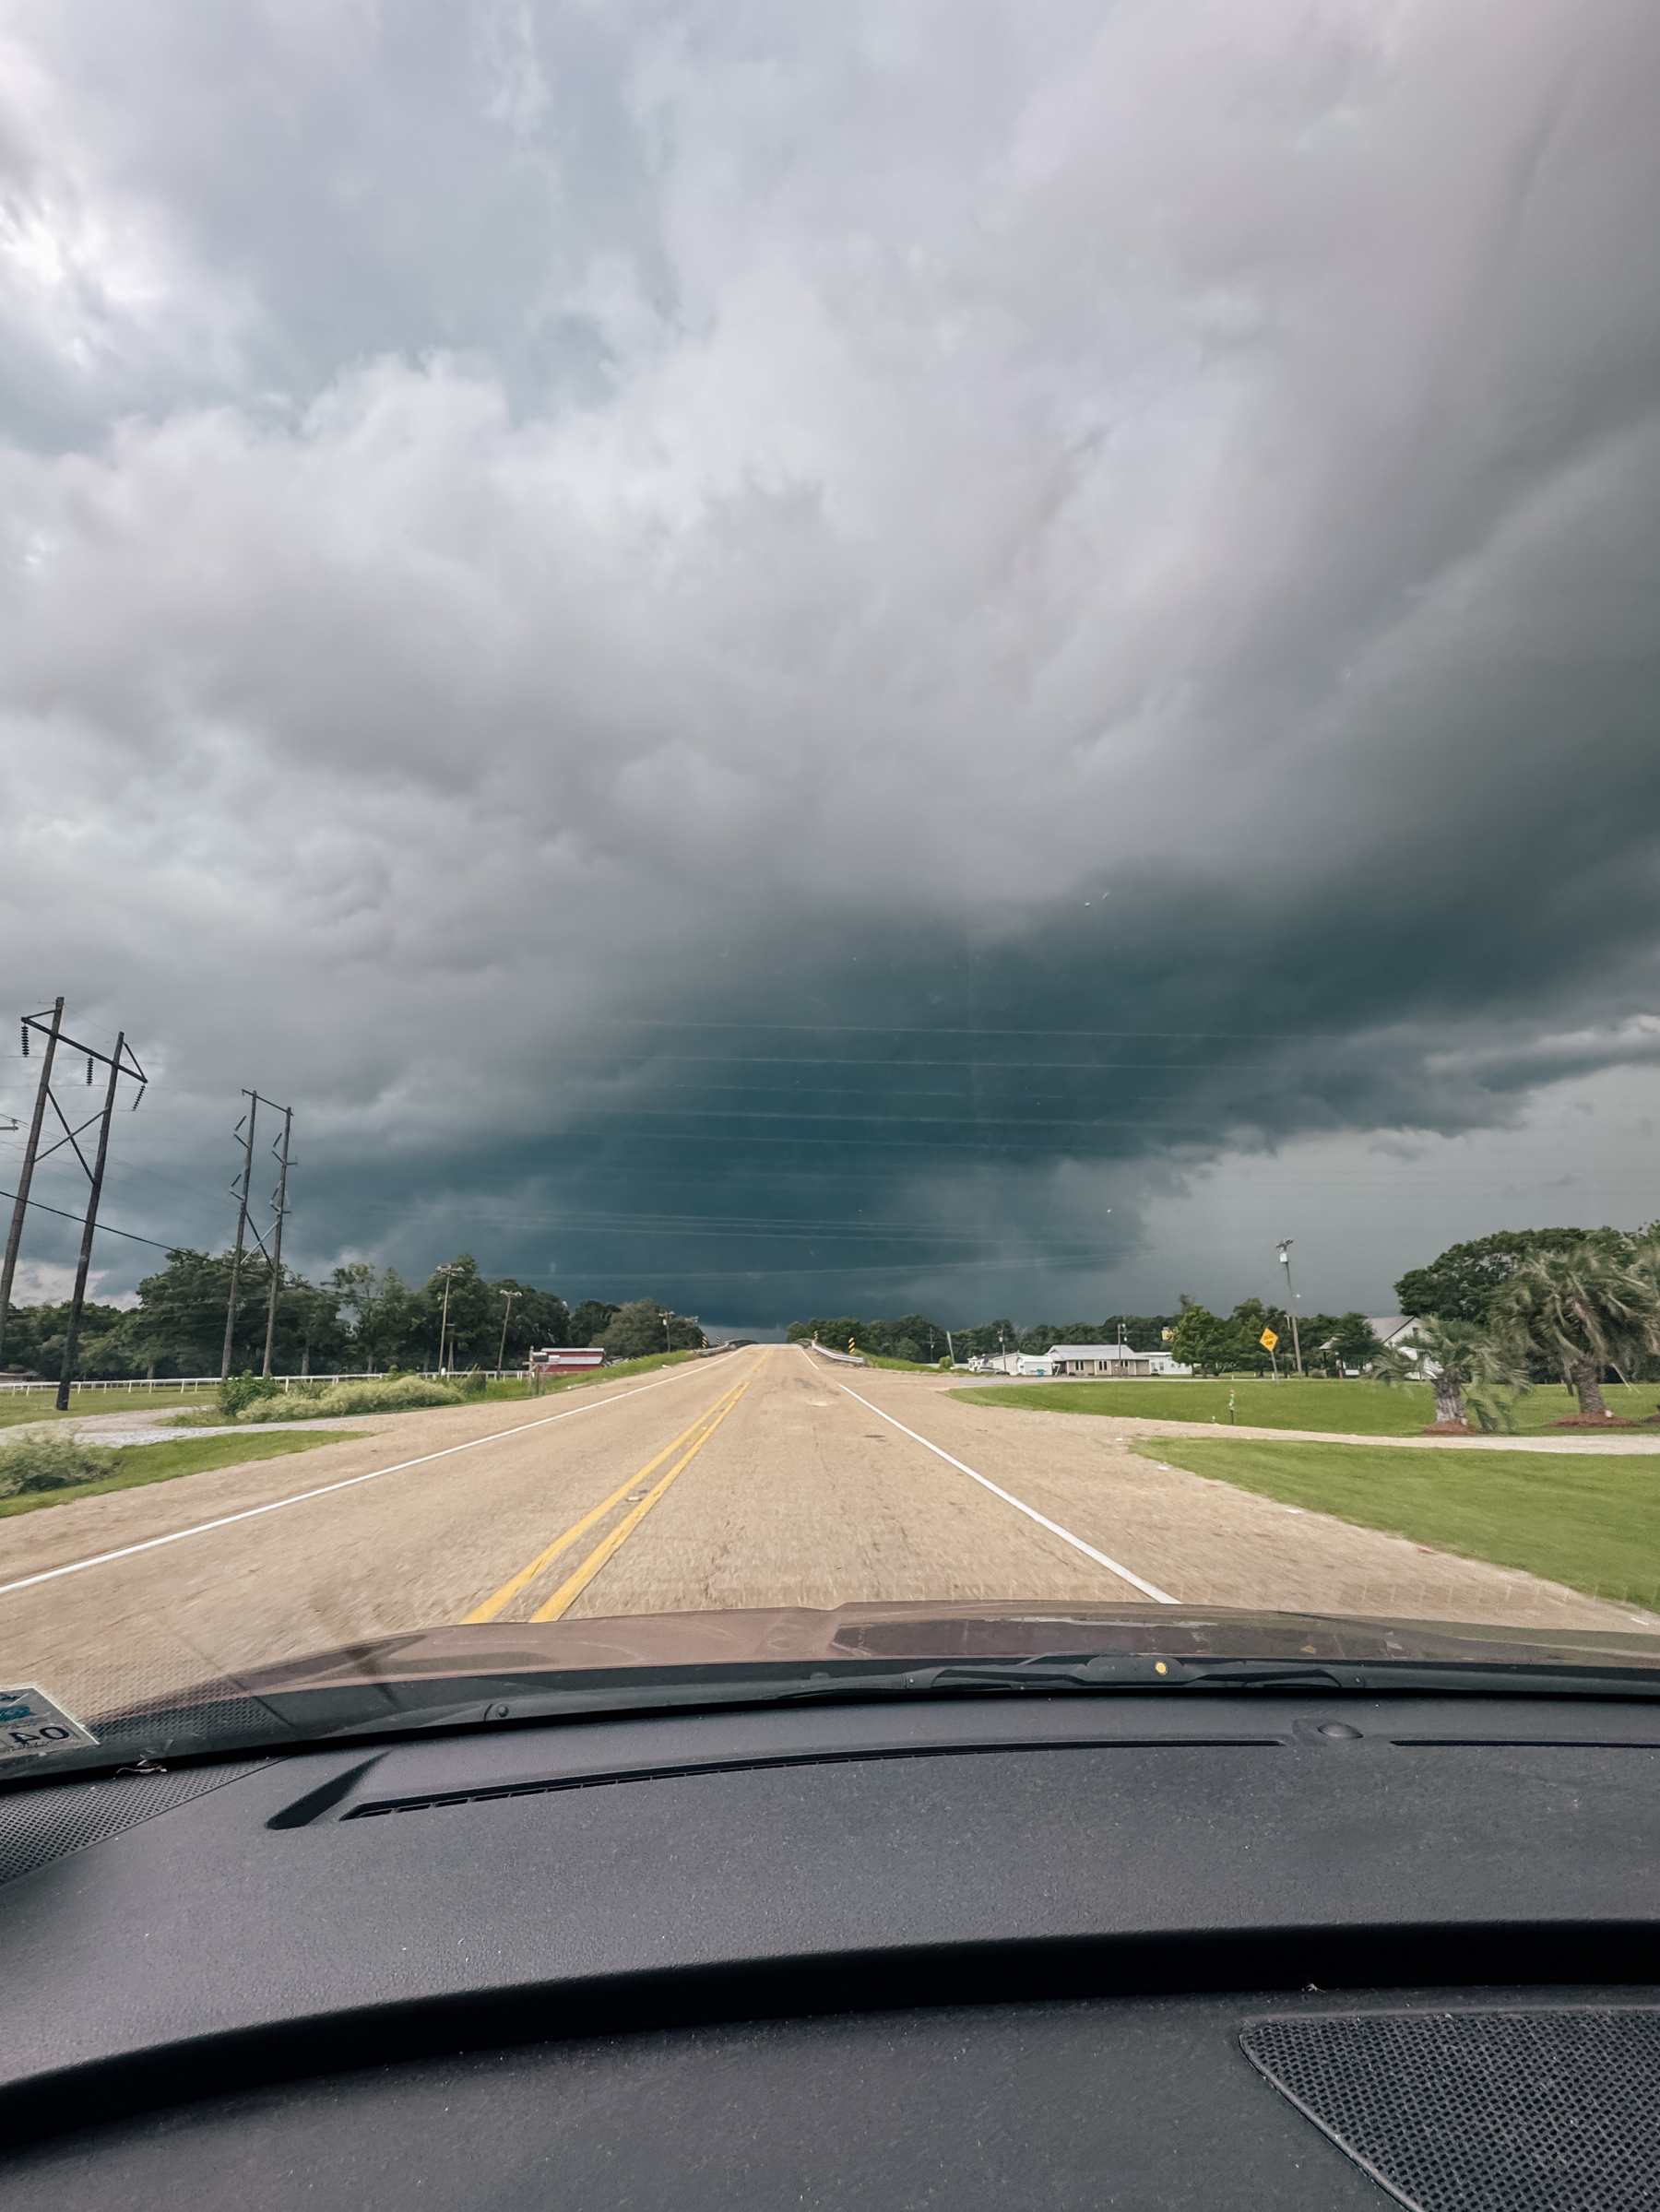 View of a storm from a car